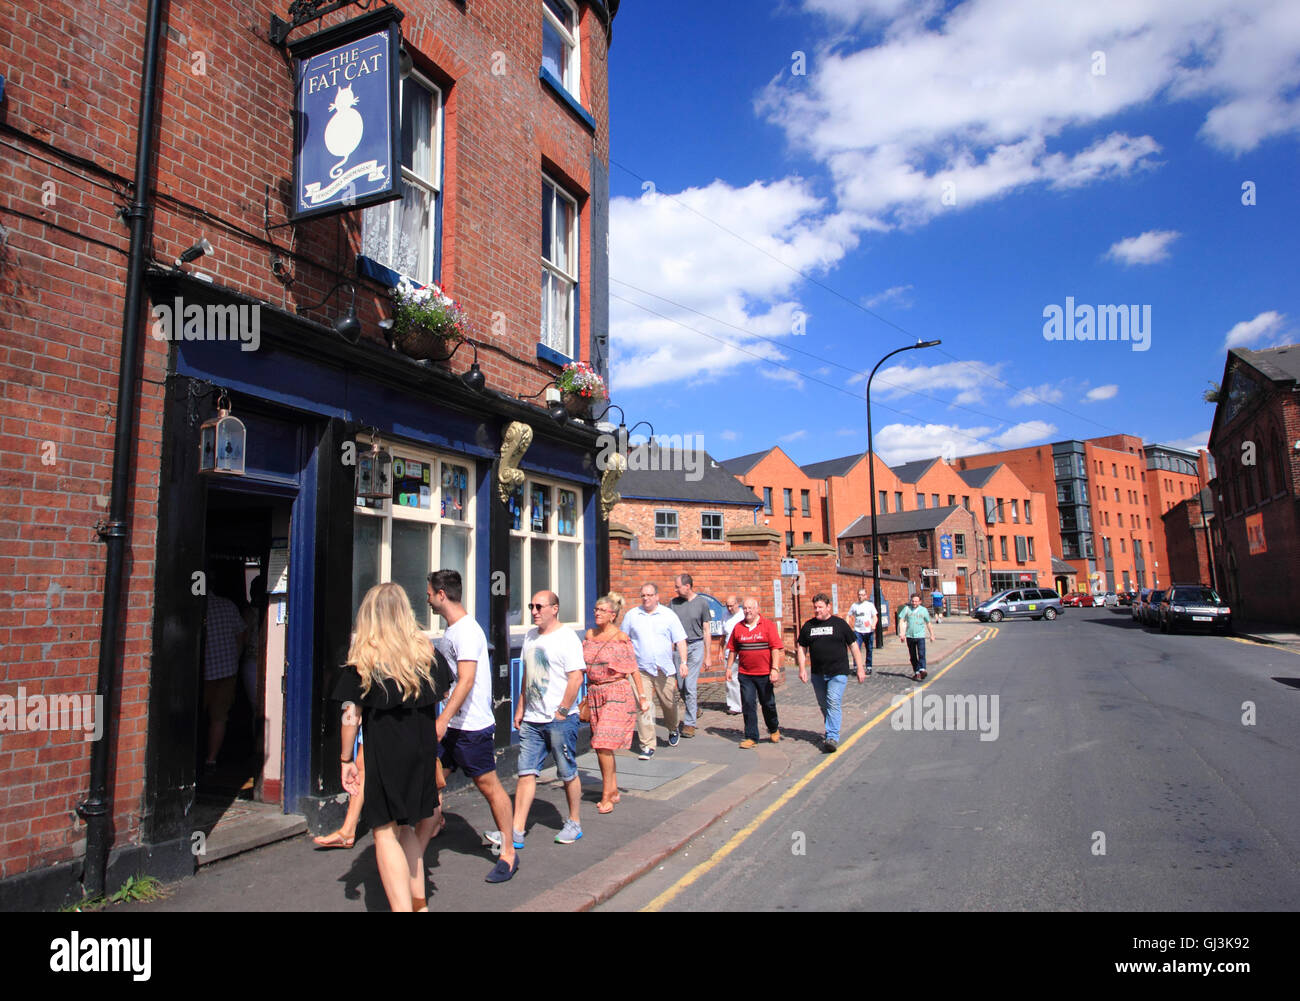 People outside The Fat Cat public house in the Kelham Island district of Sheffield, South Yorkshire England UK - summer Stock Photo